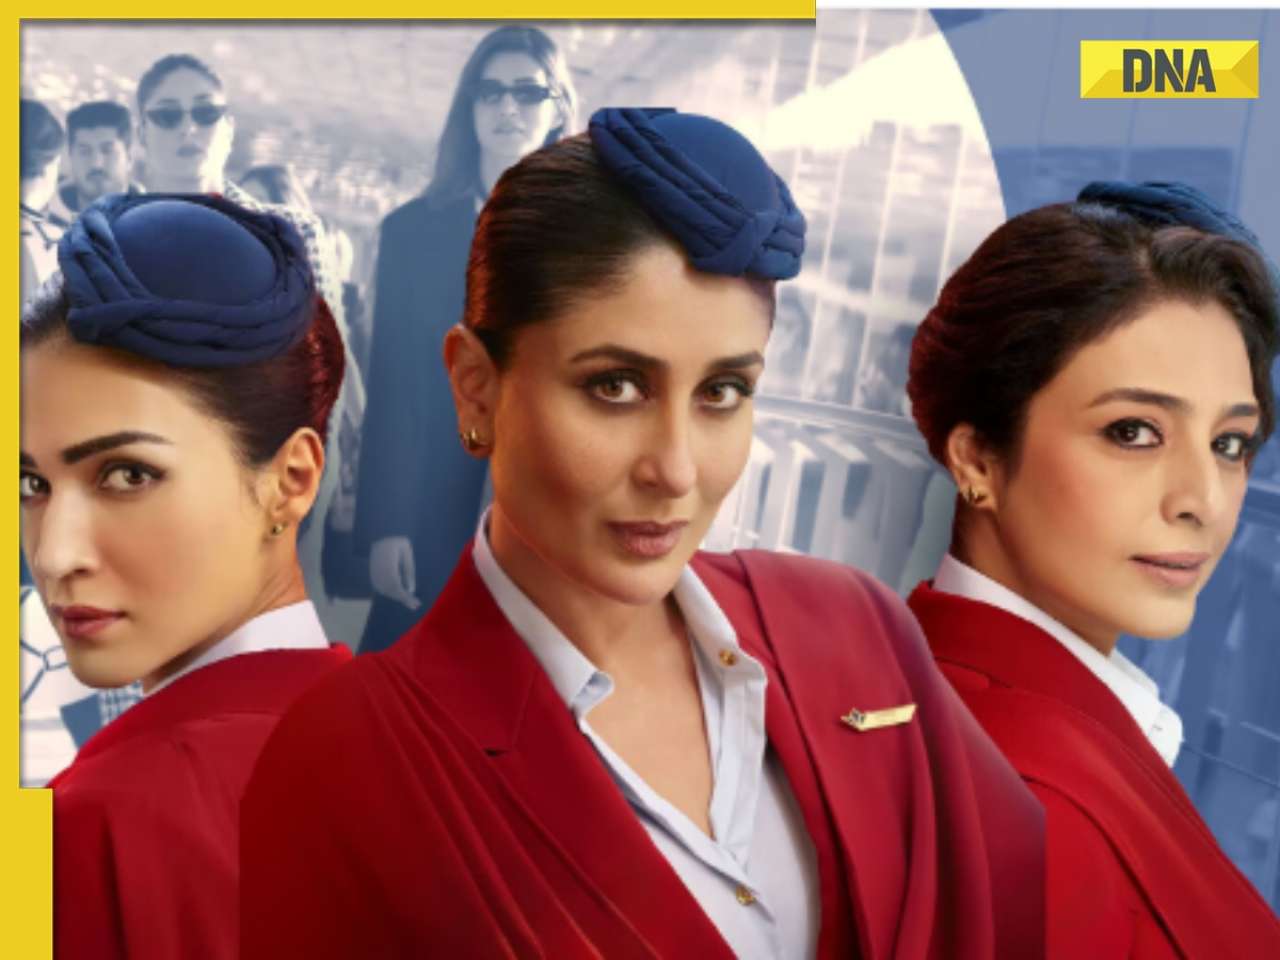 Crew box office collection day 2: Kareena, Tabu, Kriti-starrer holds well, mints Rs 10.28 crore